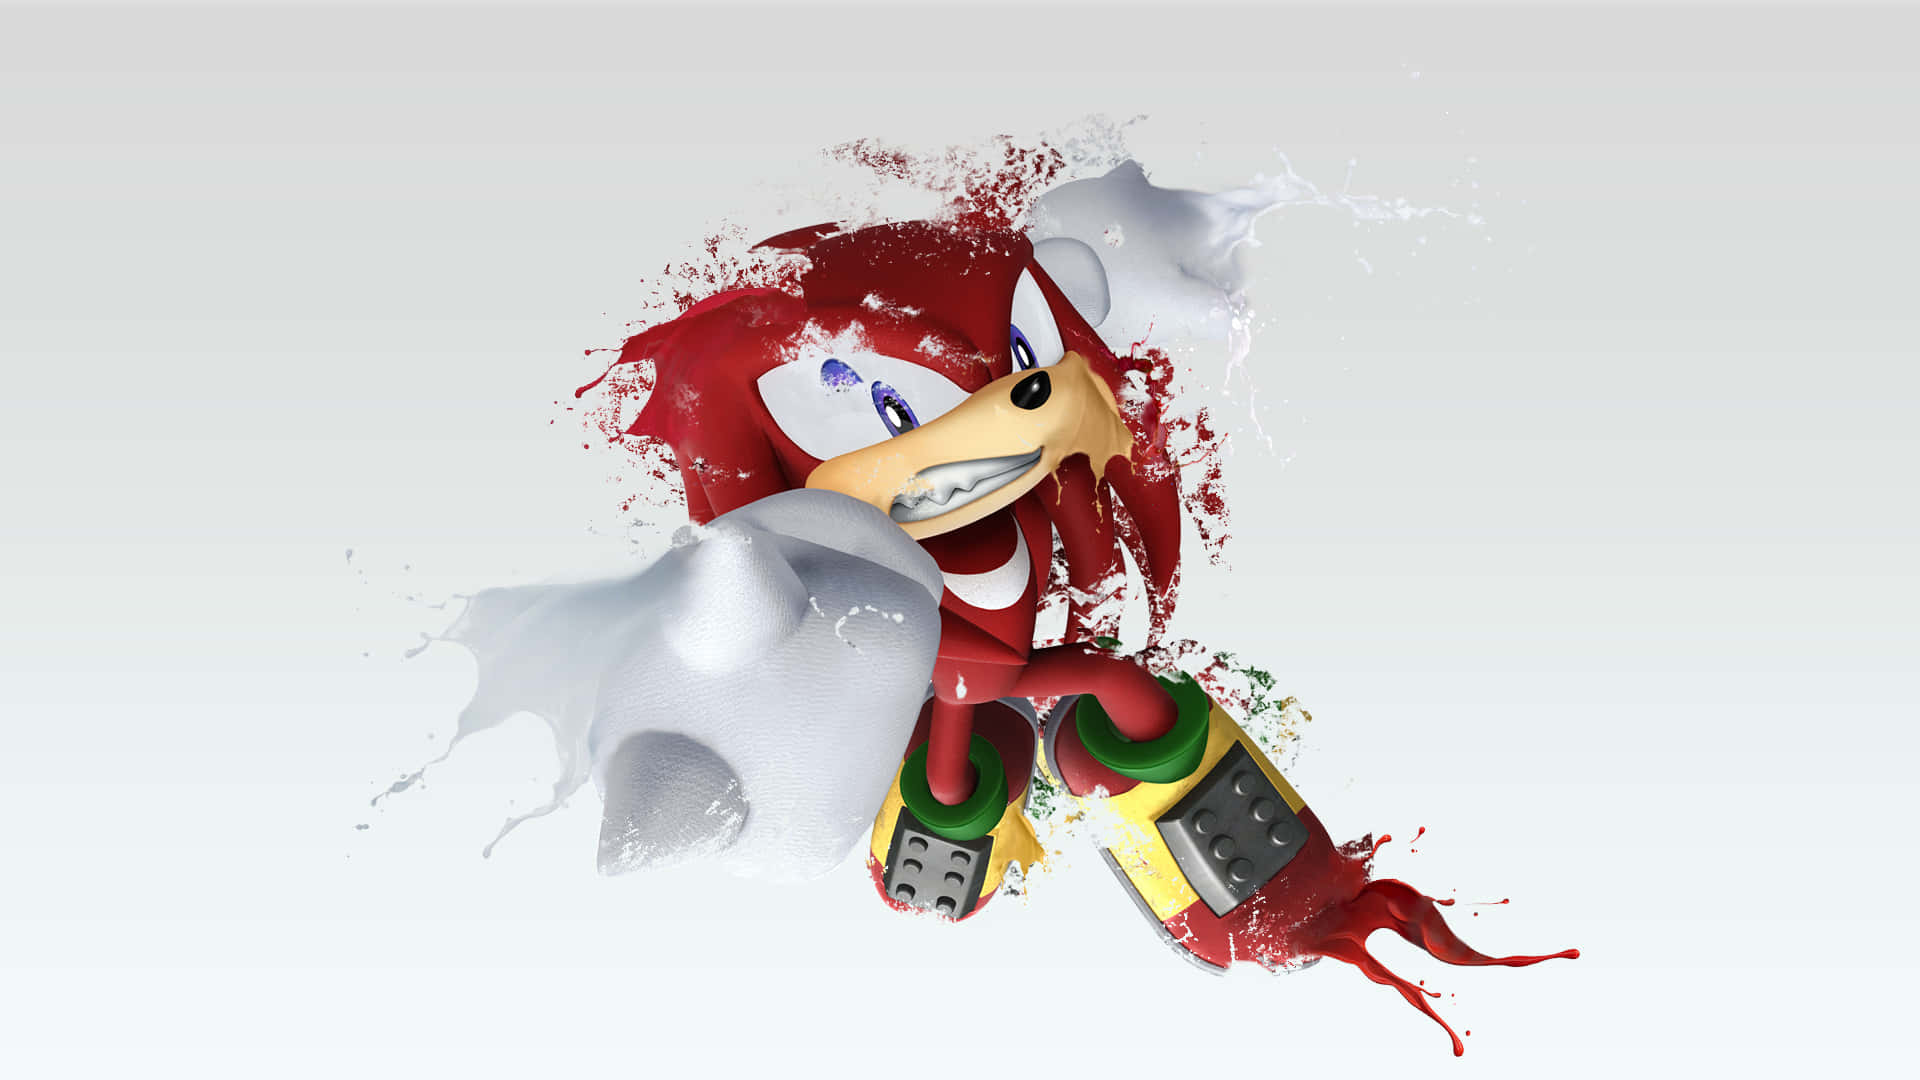 Raw Muscle Power Of Knuckles Background